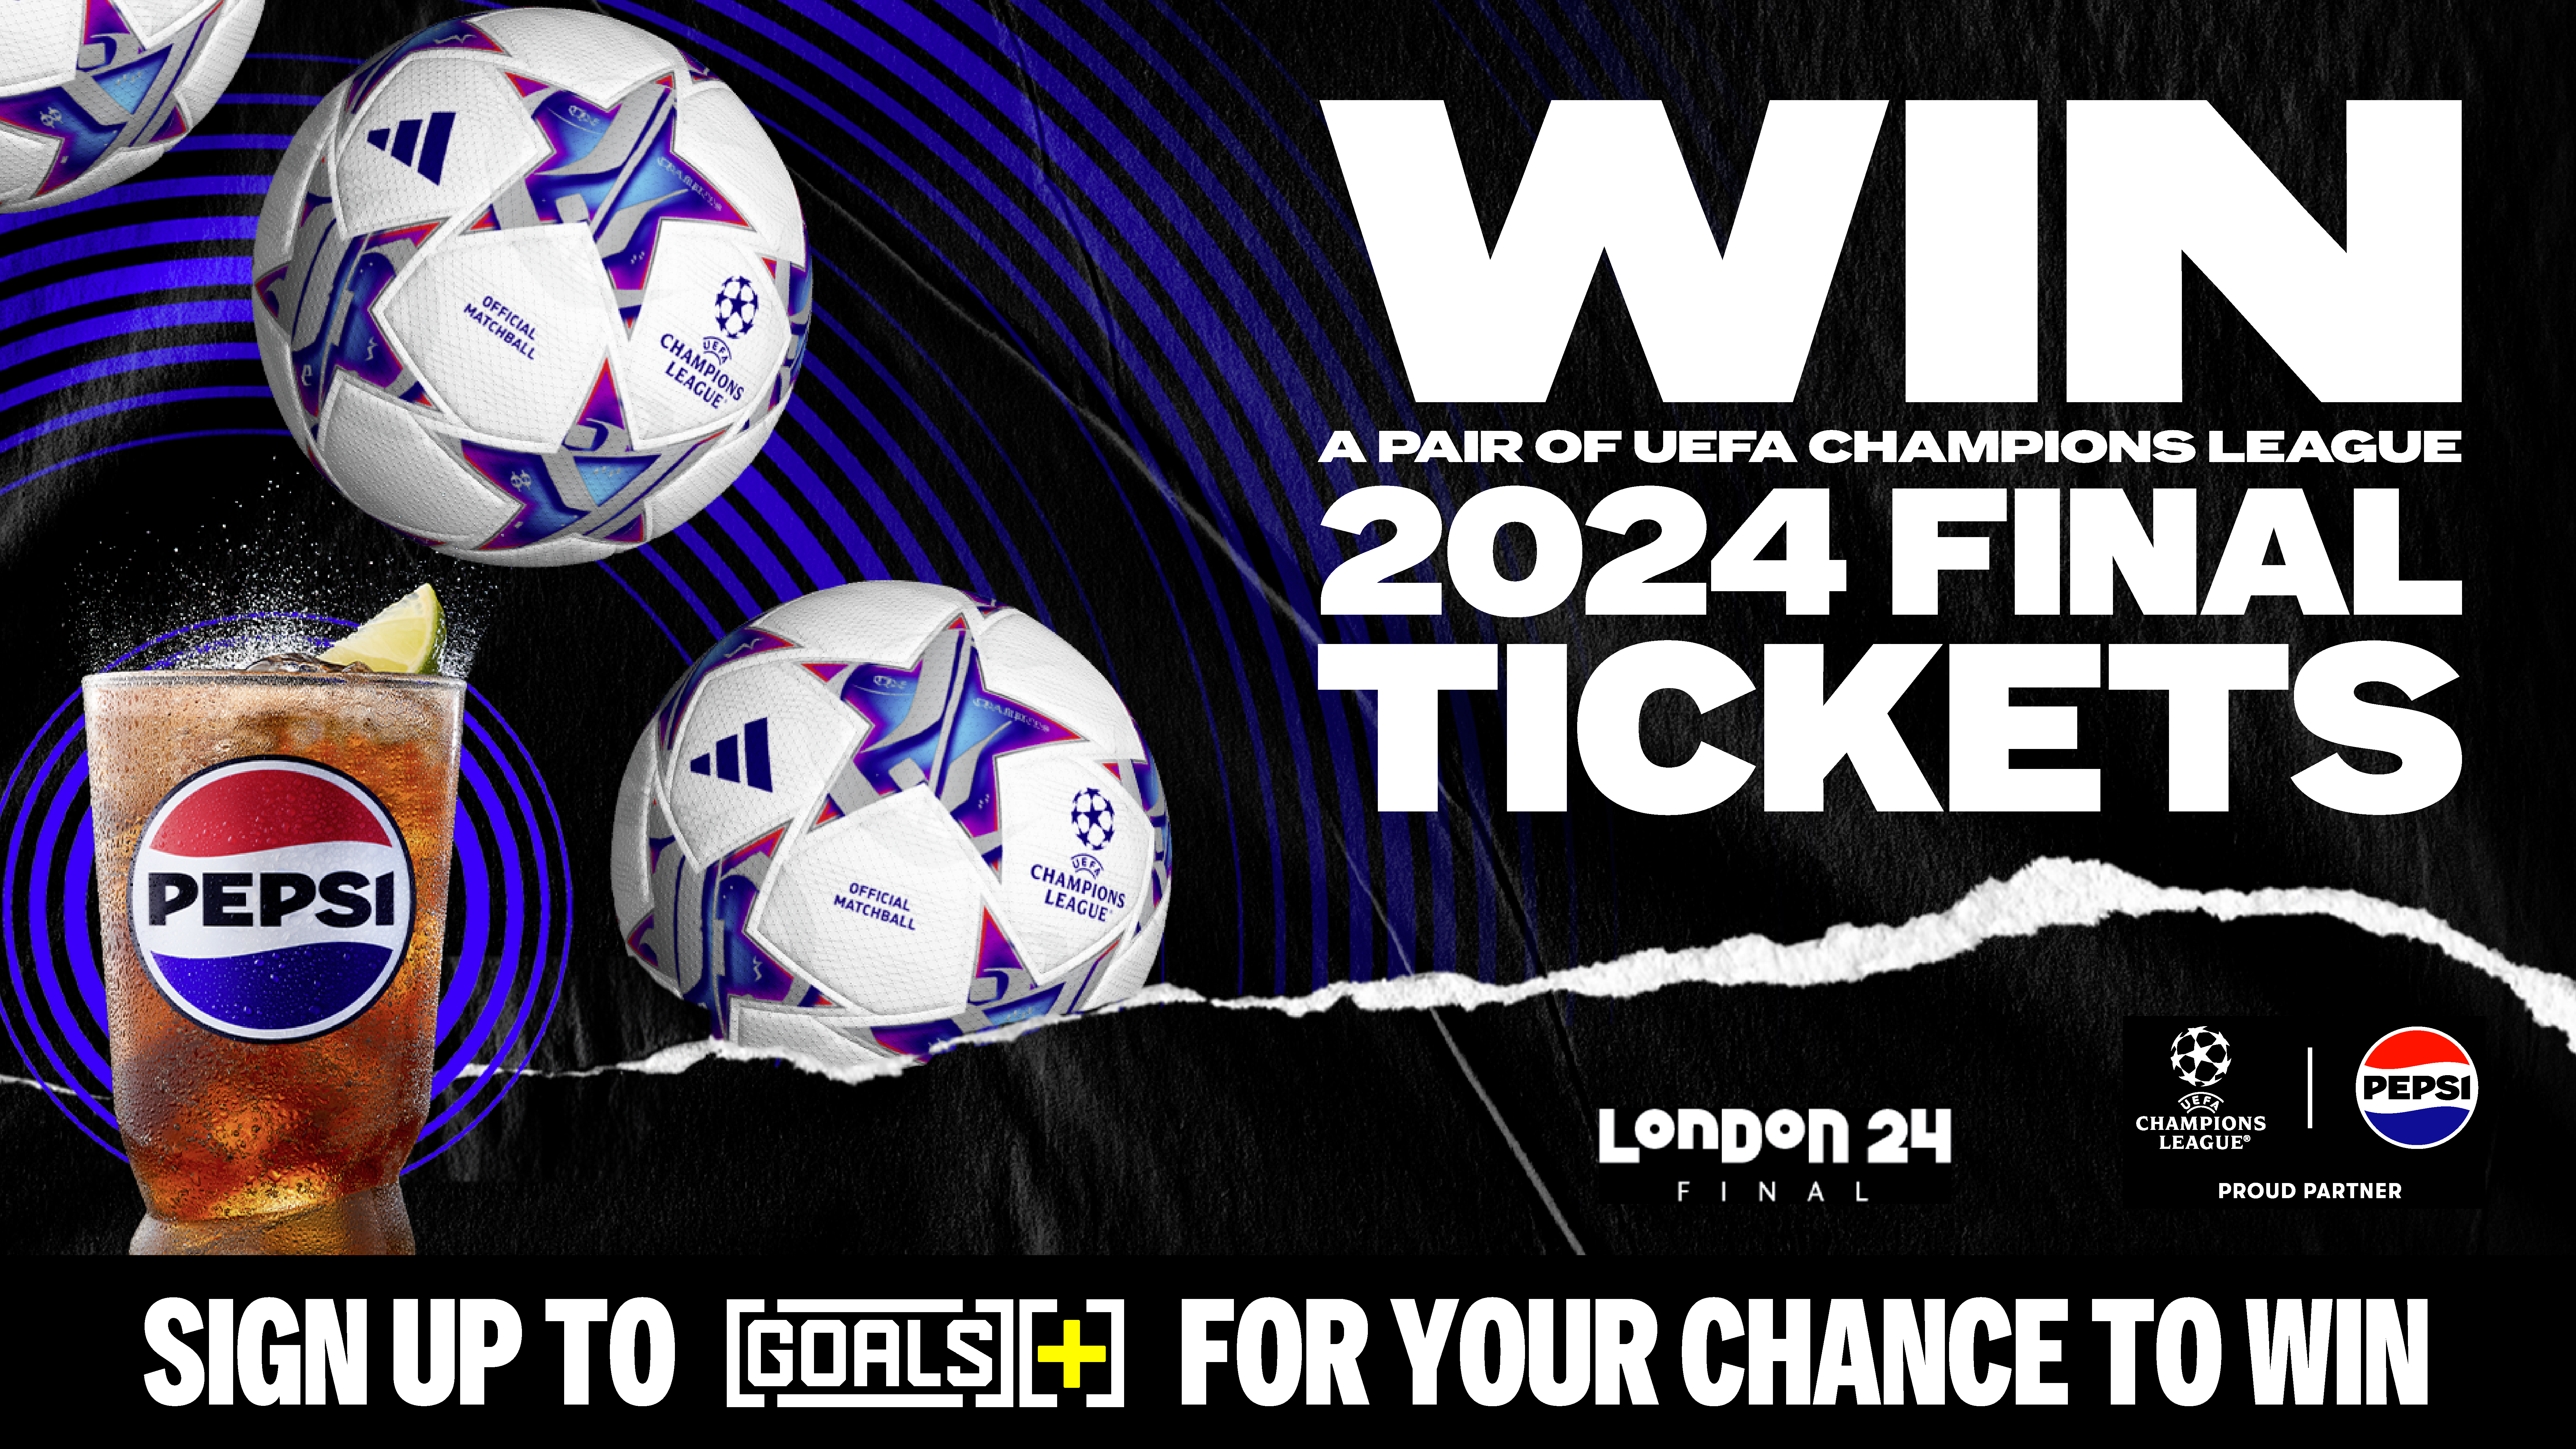 Win a pair of Champions League 2024 Final Tickets Image